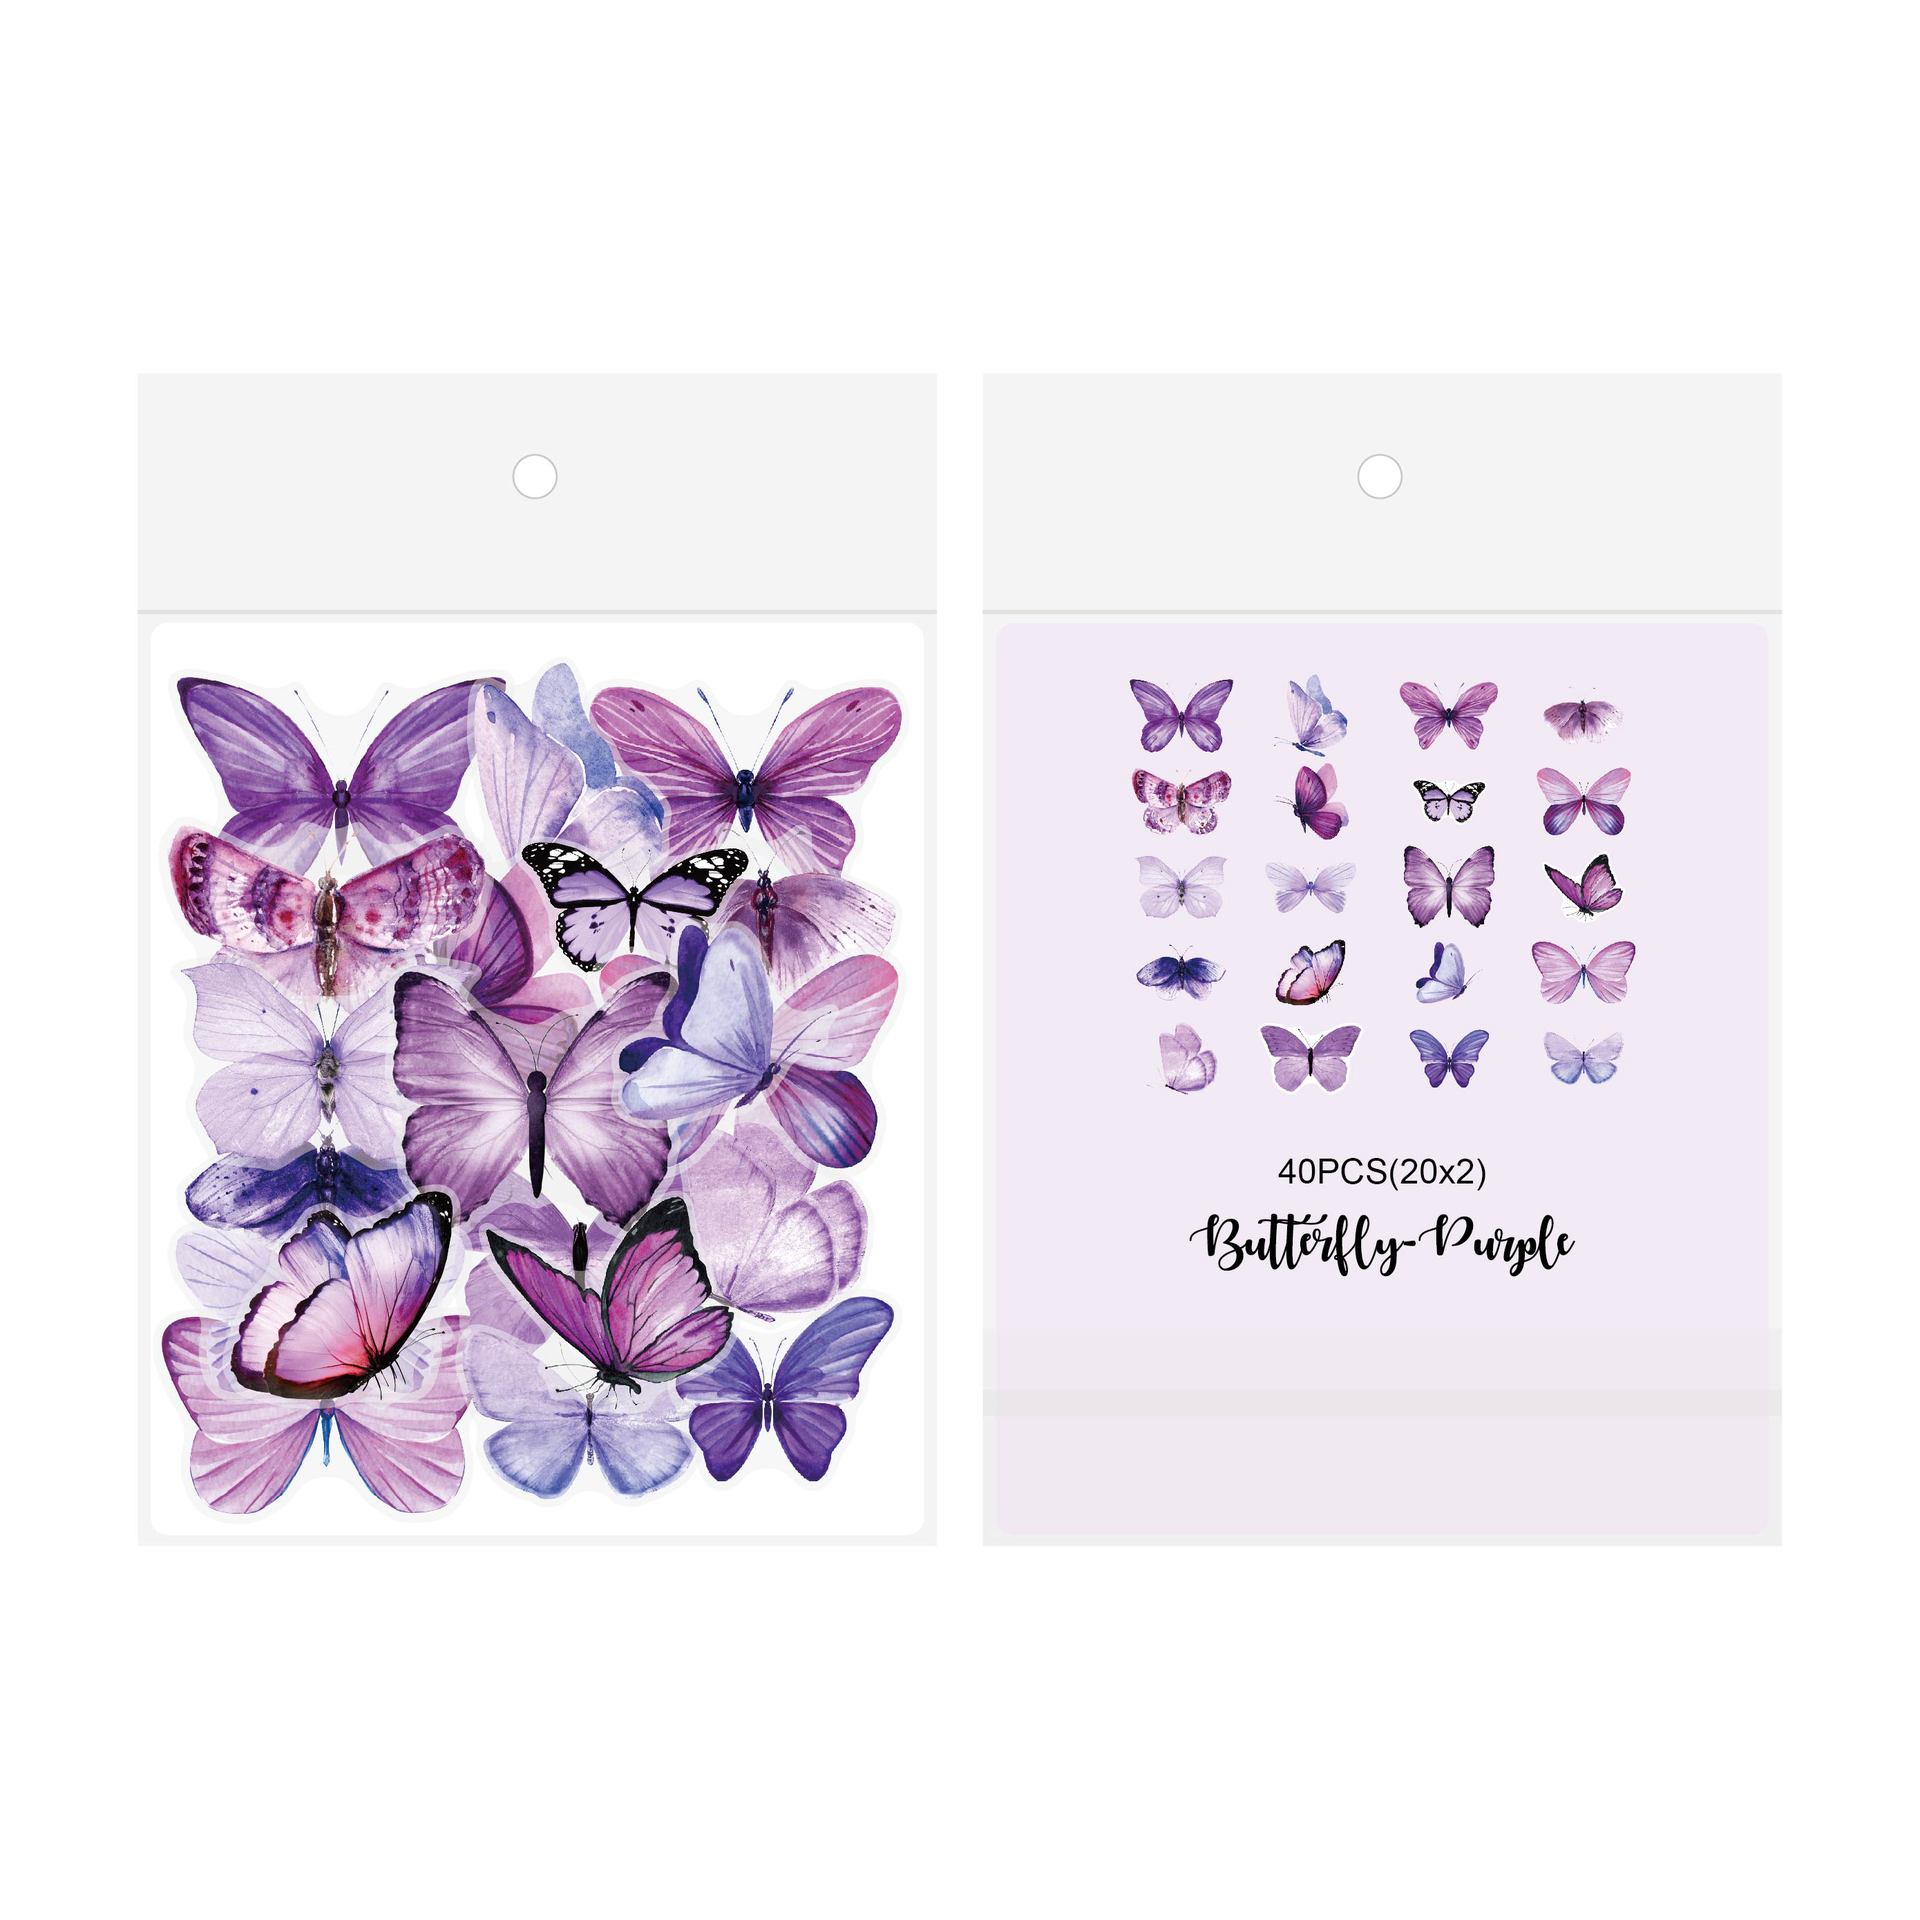 PAGOW 11sheets Butterfly Rhinestone Stickers Self Adhesive